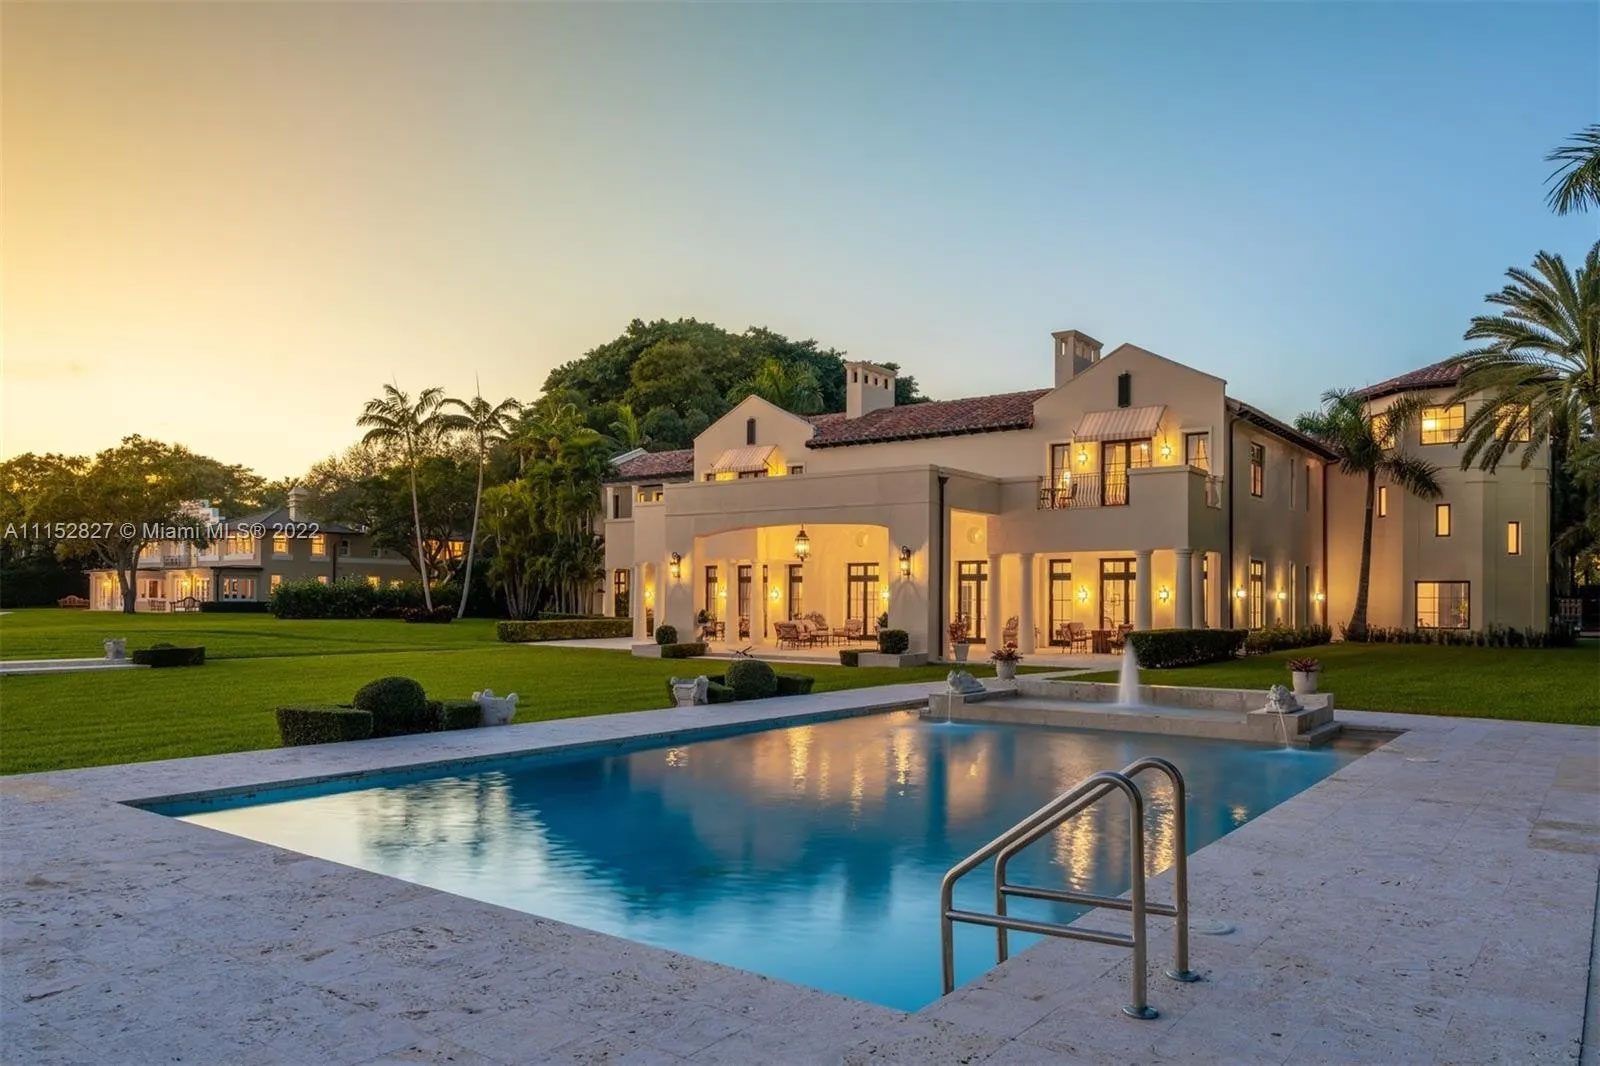 The Top 10 Most Expensive US Home Sales in 2022